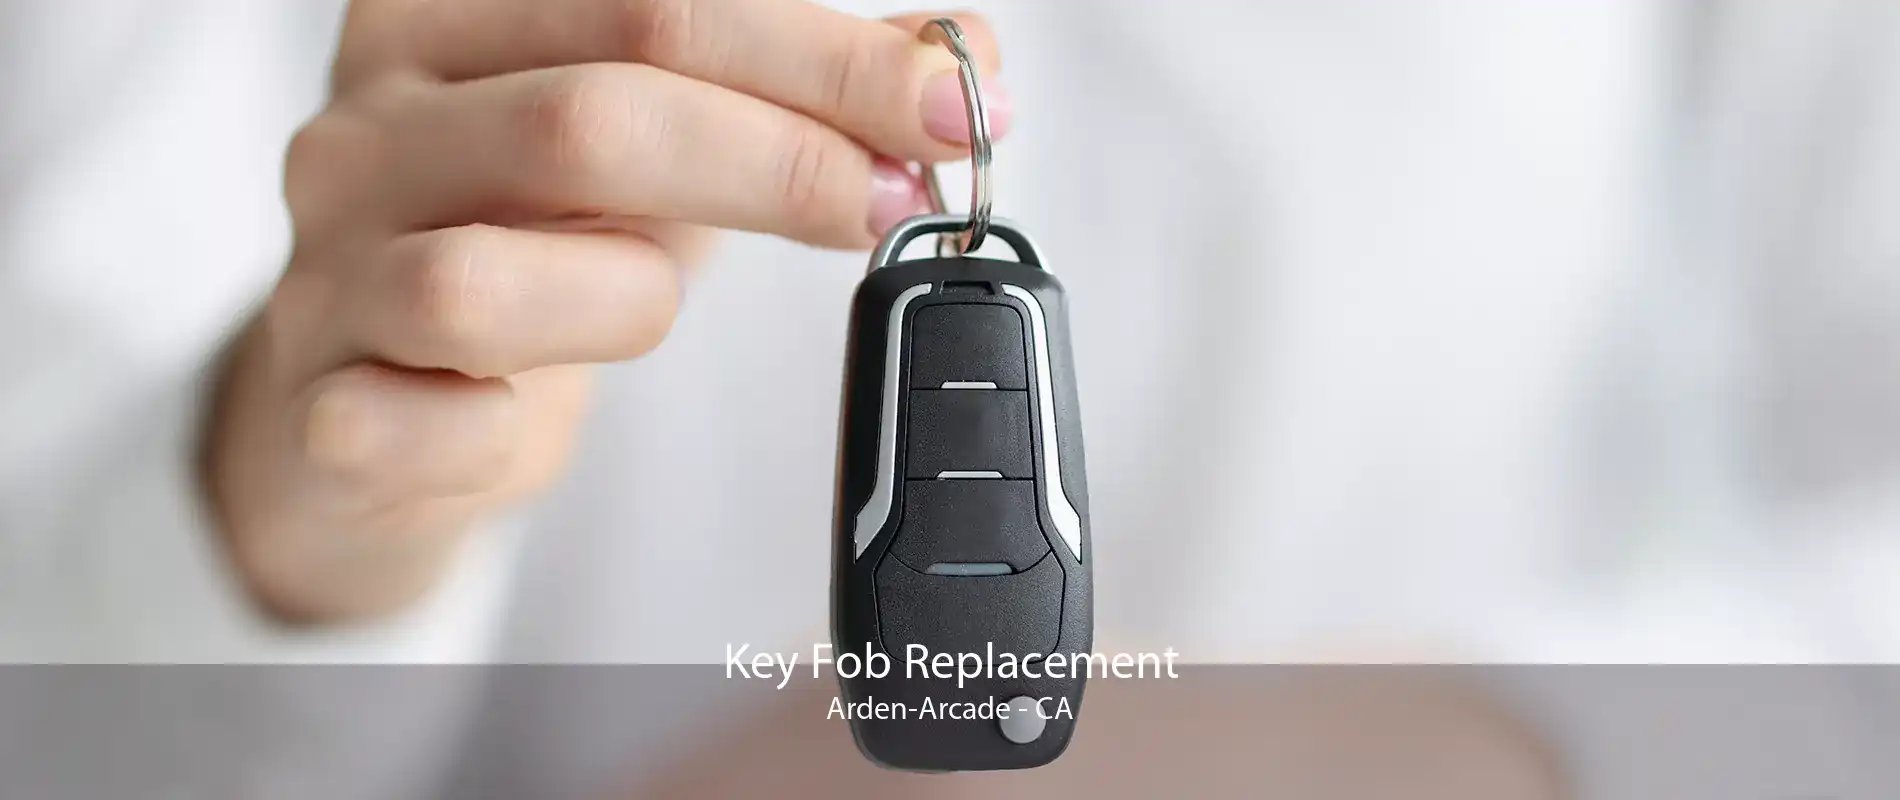 Key Fob Replacement Arden-Arcade - CA